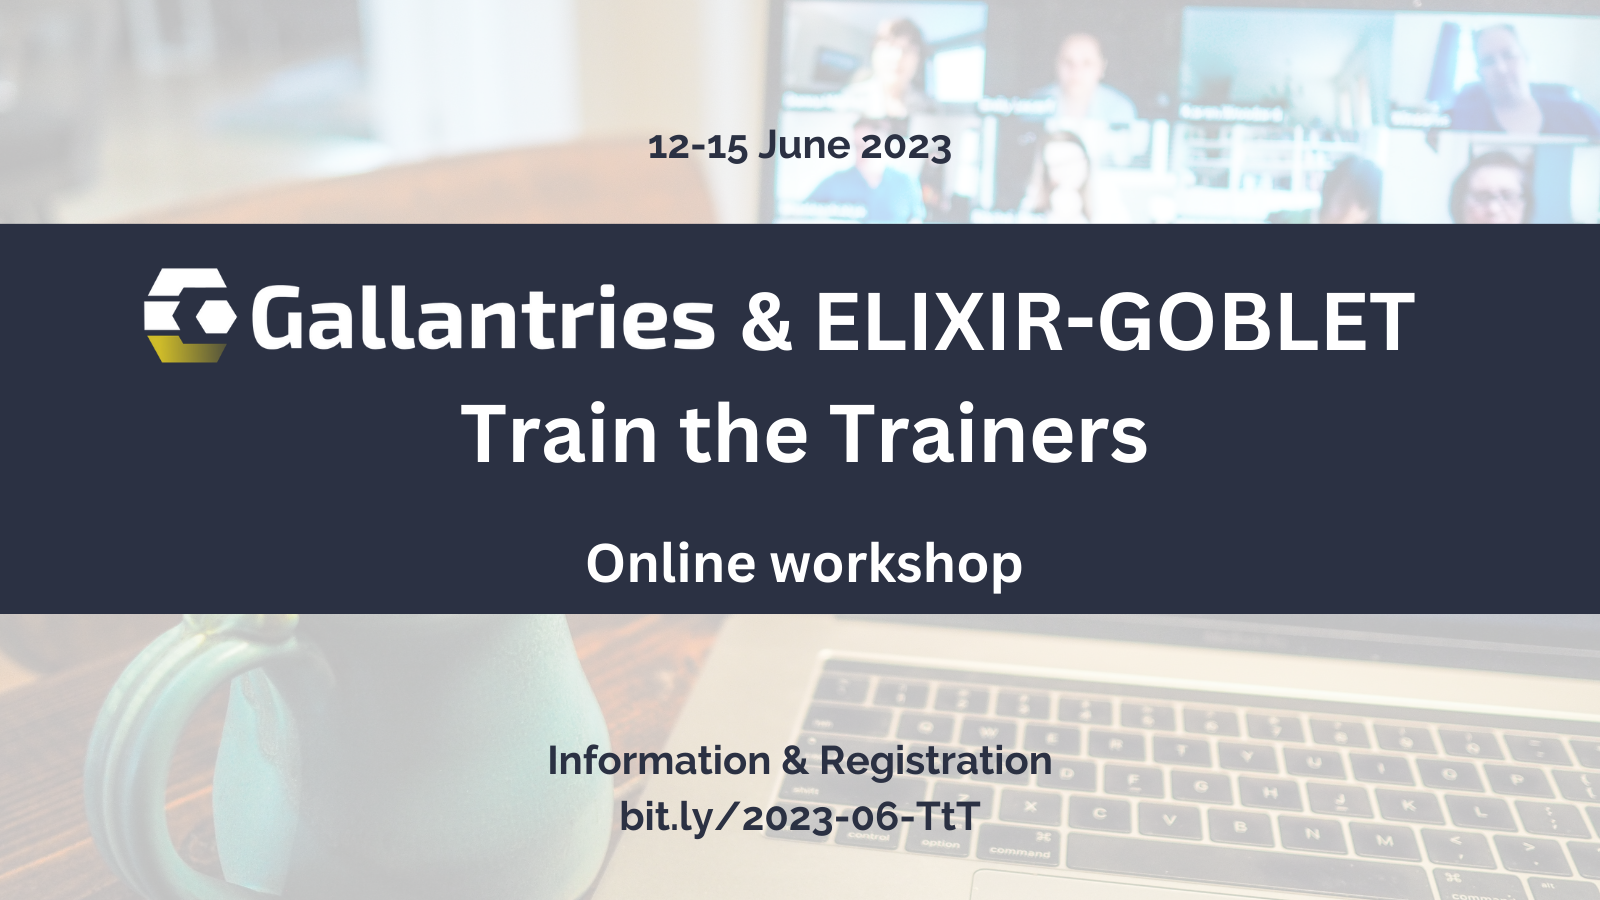 Flyer for the Gallantries & ELIXIR-GOBLET Train the Trainers